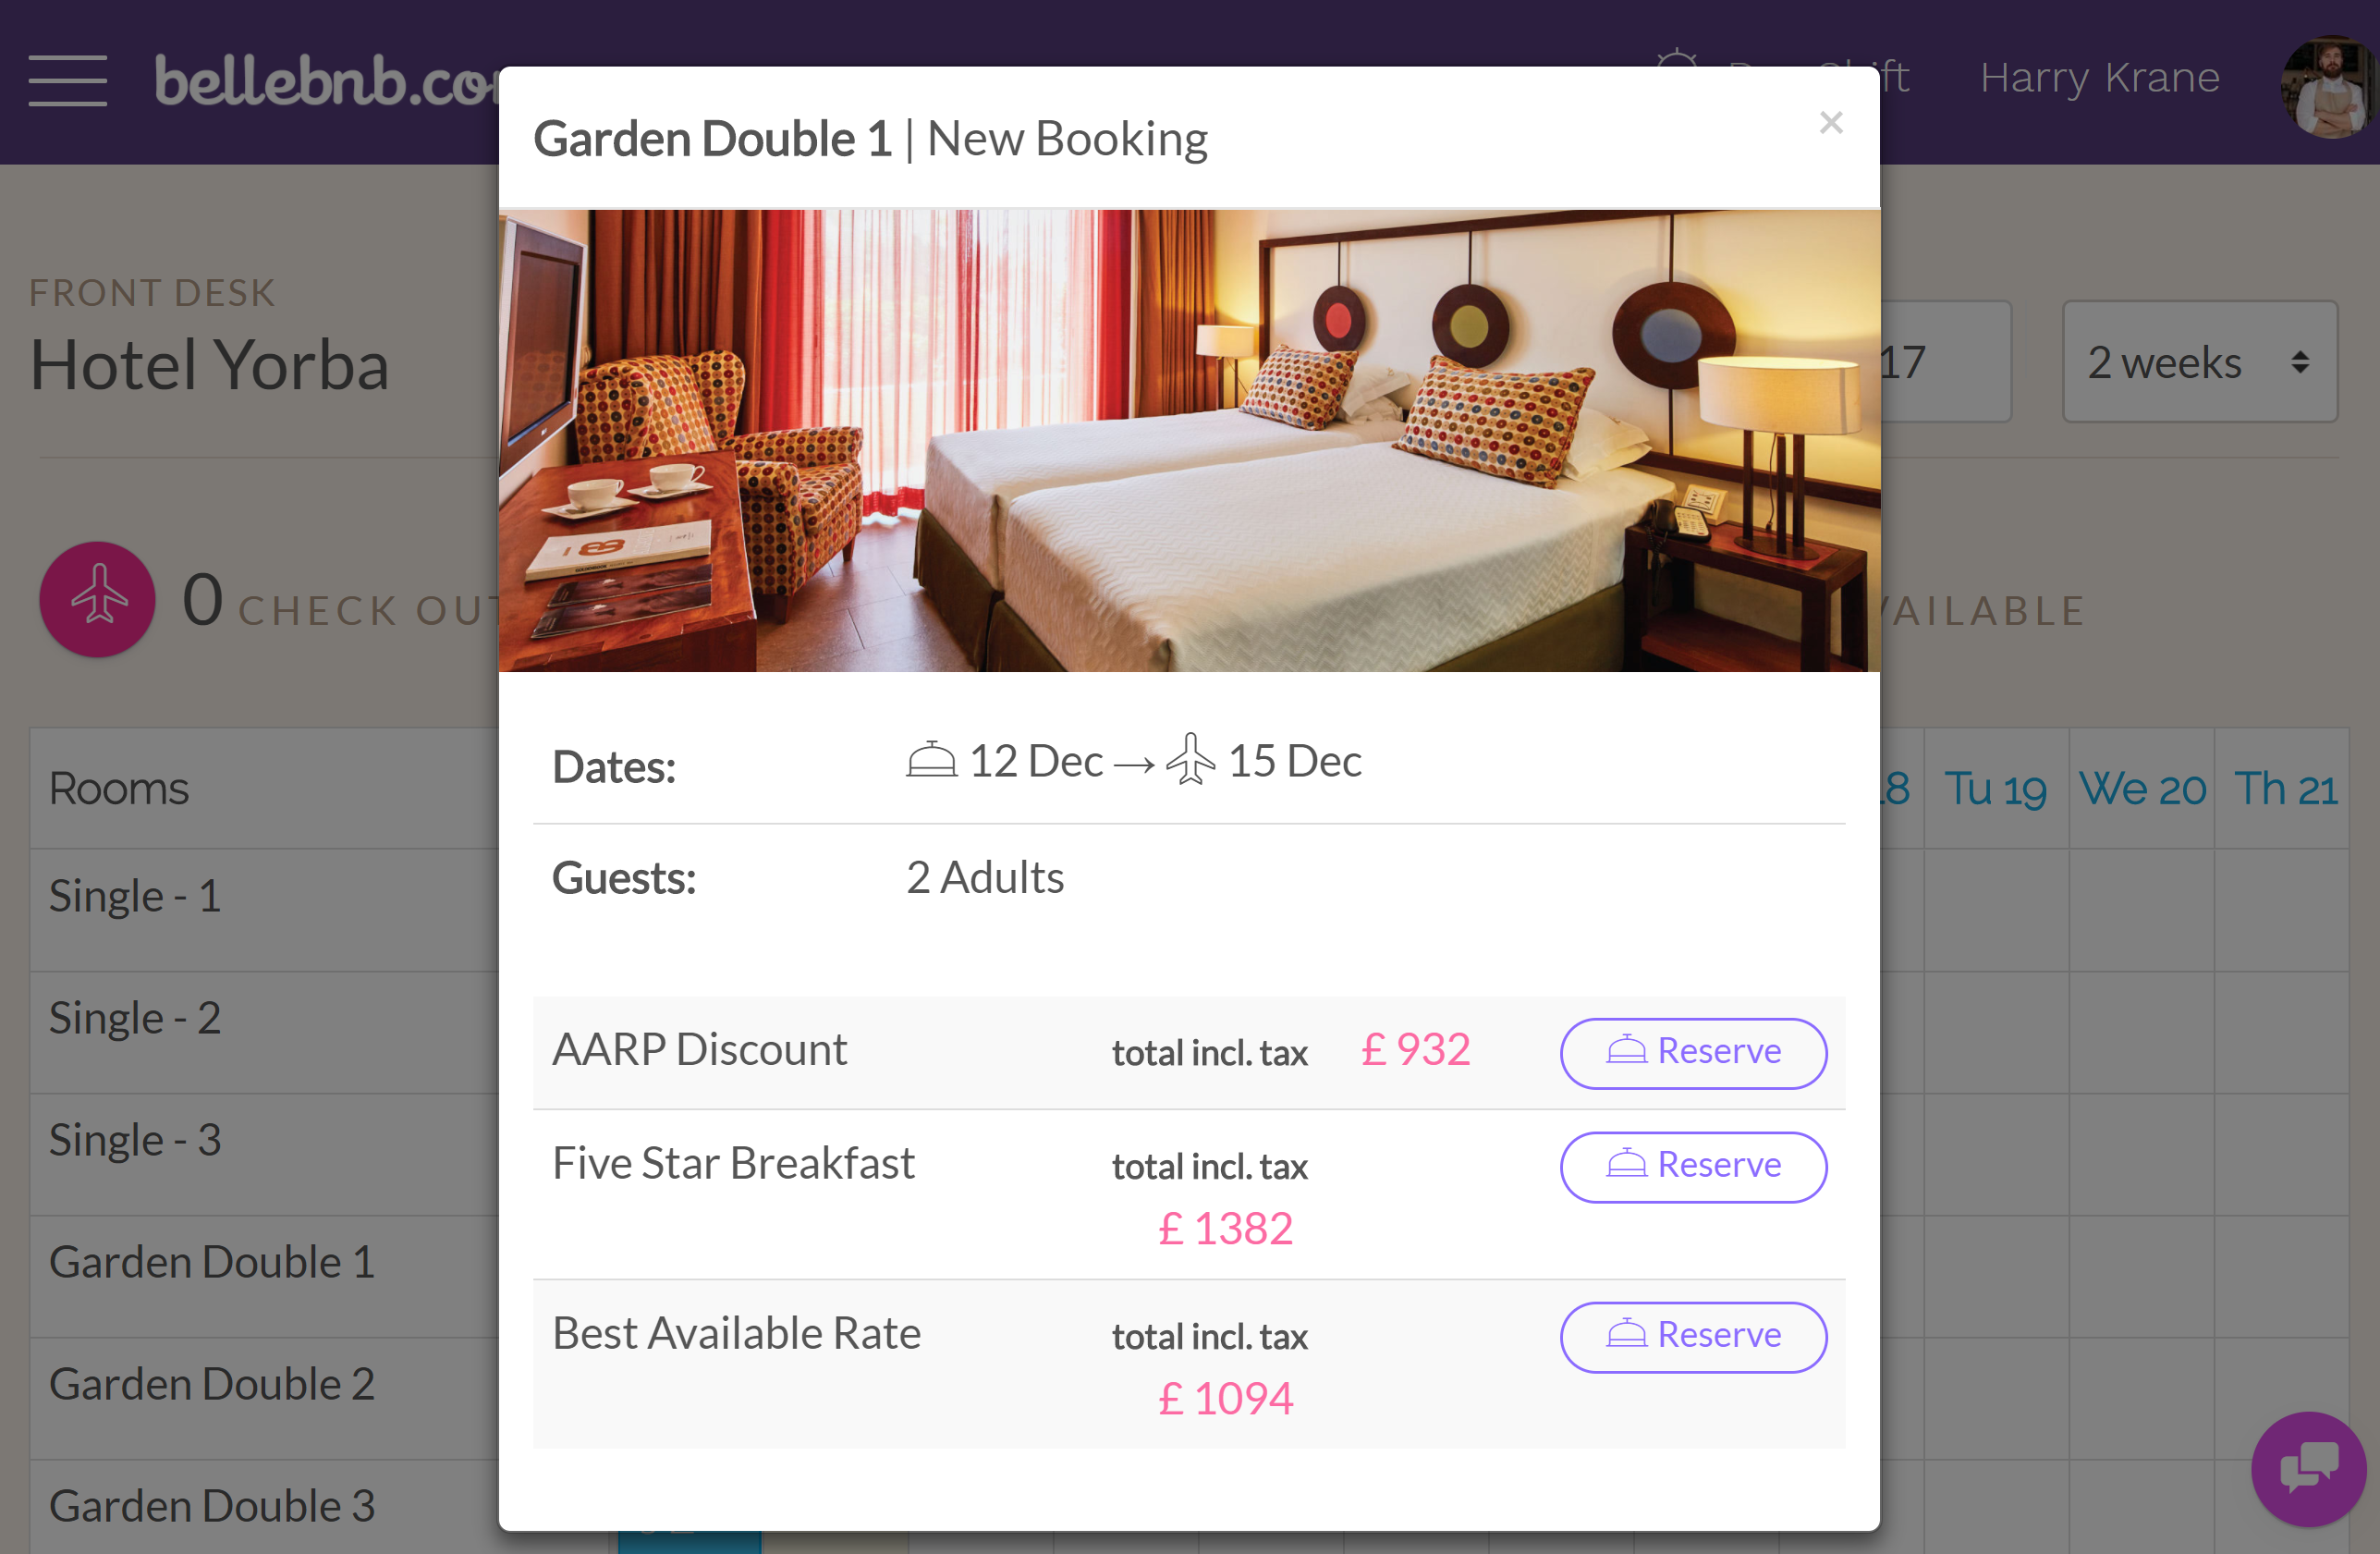 Enter the number of adults and children for the room, click continue, then select the rate. This way you book exactly the room you want for the indicated dates.